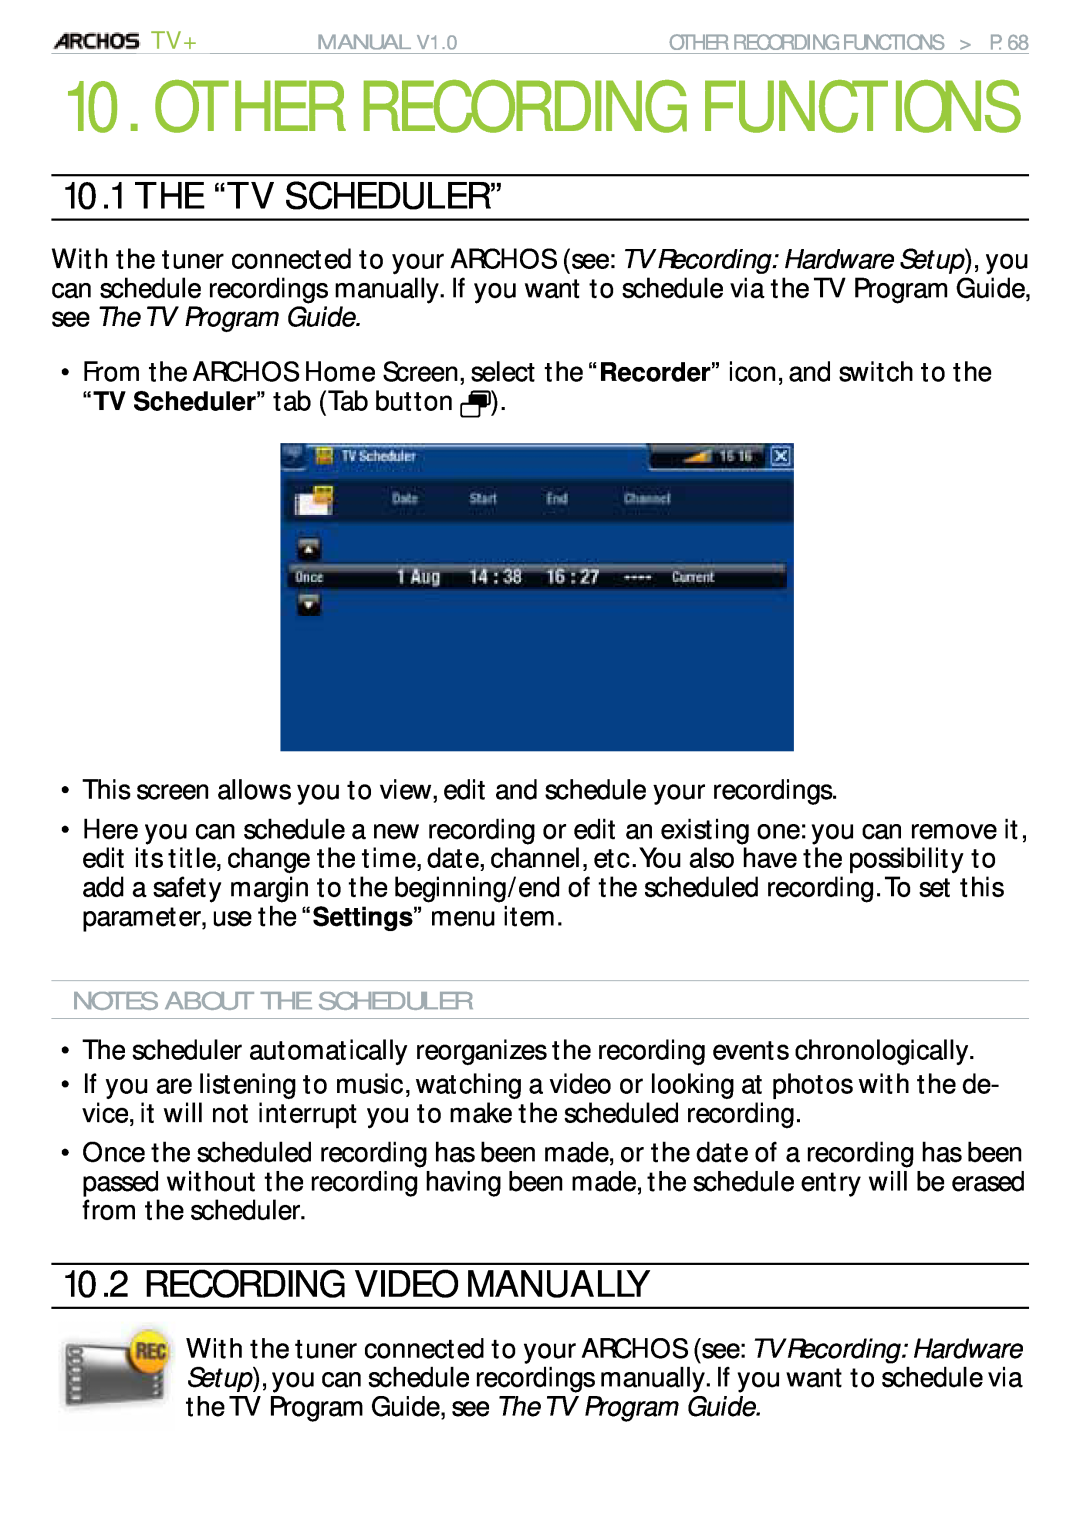 Archos 500973 user manual The “Tv Scheduler”, Recording Video Manually, Other Recording Functions 